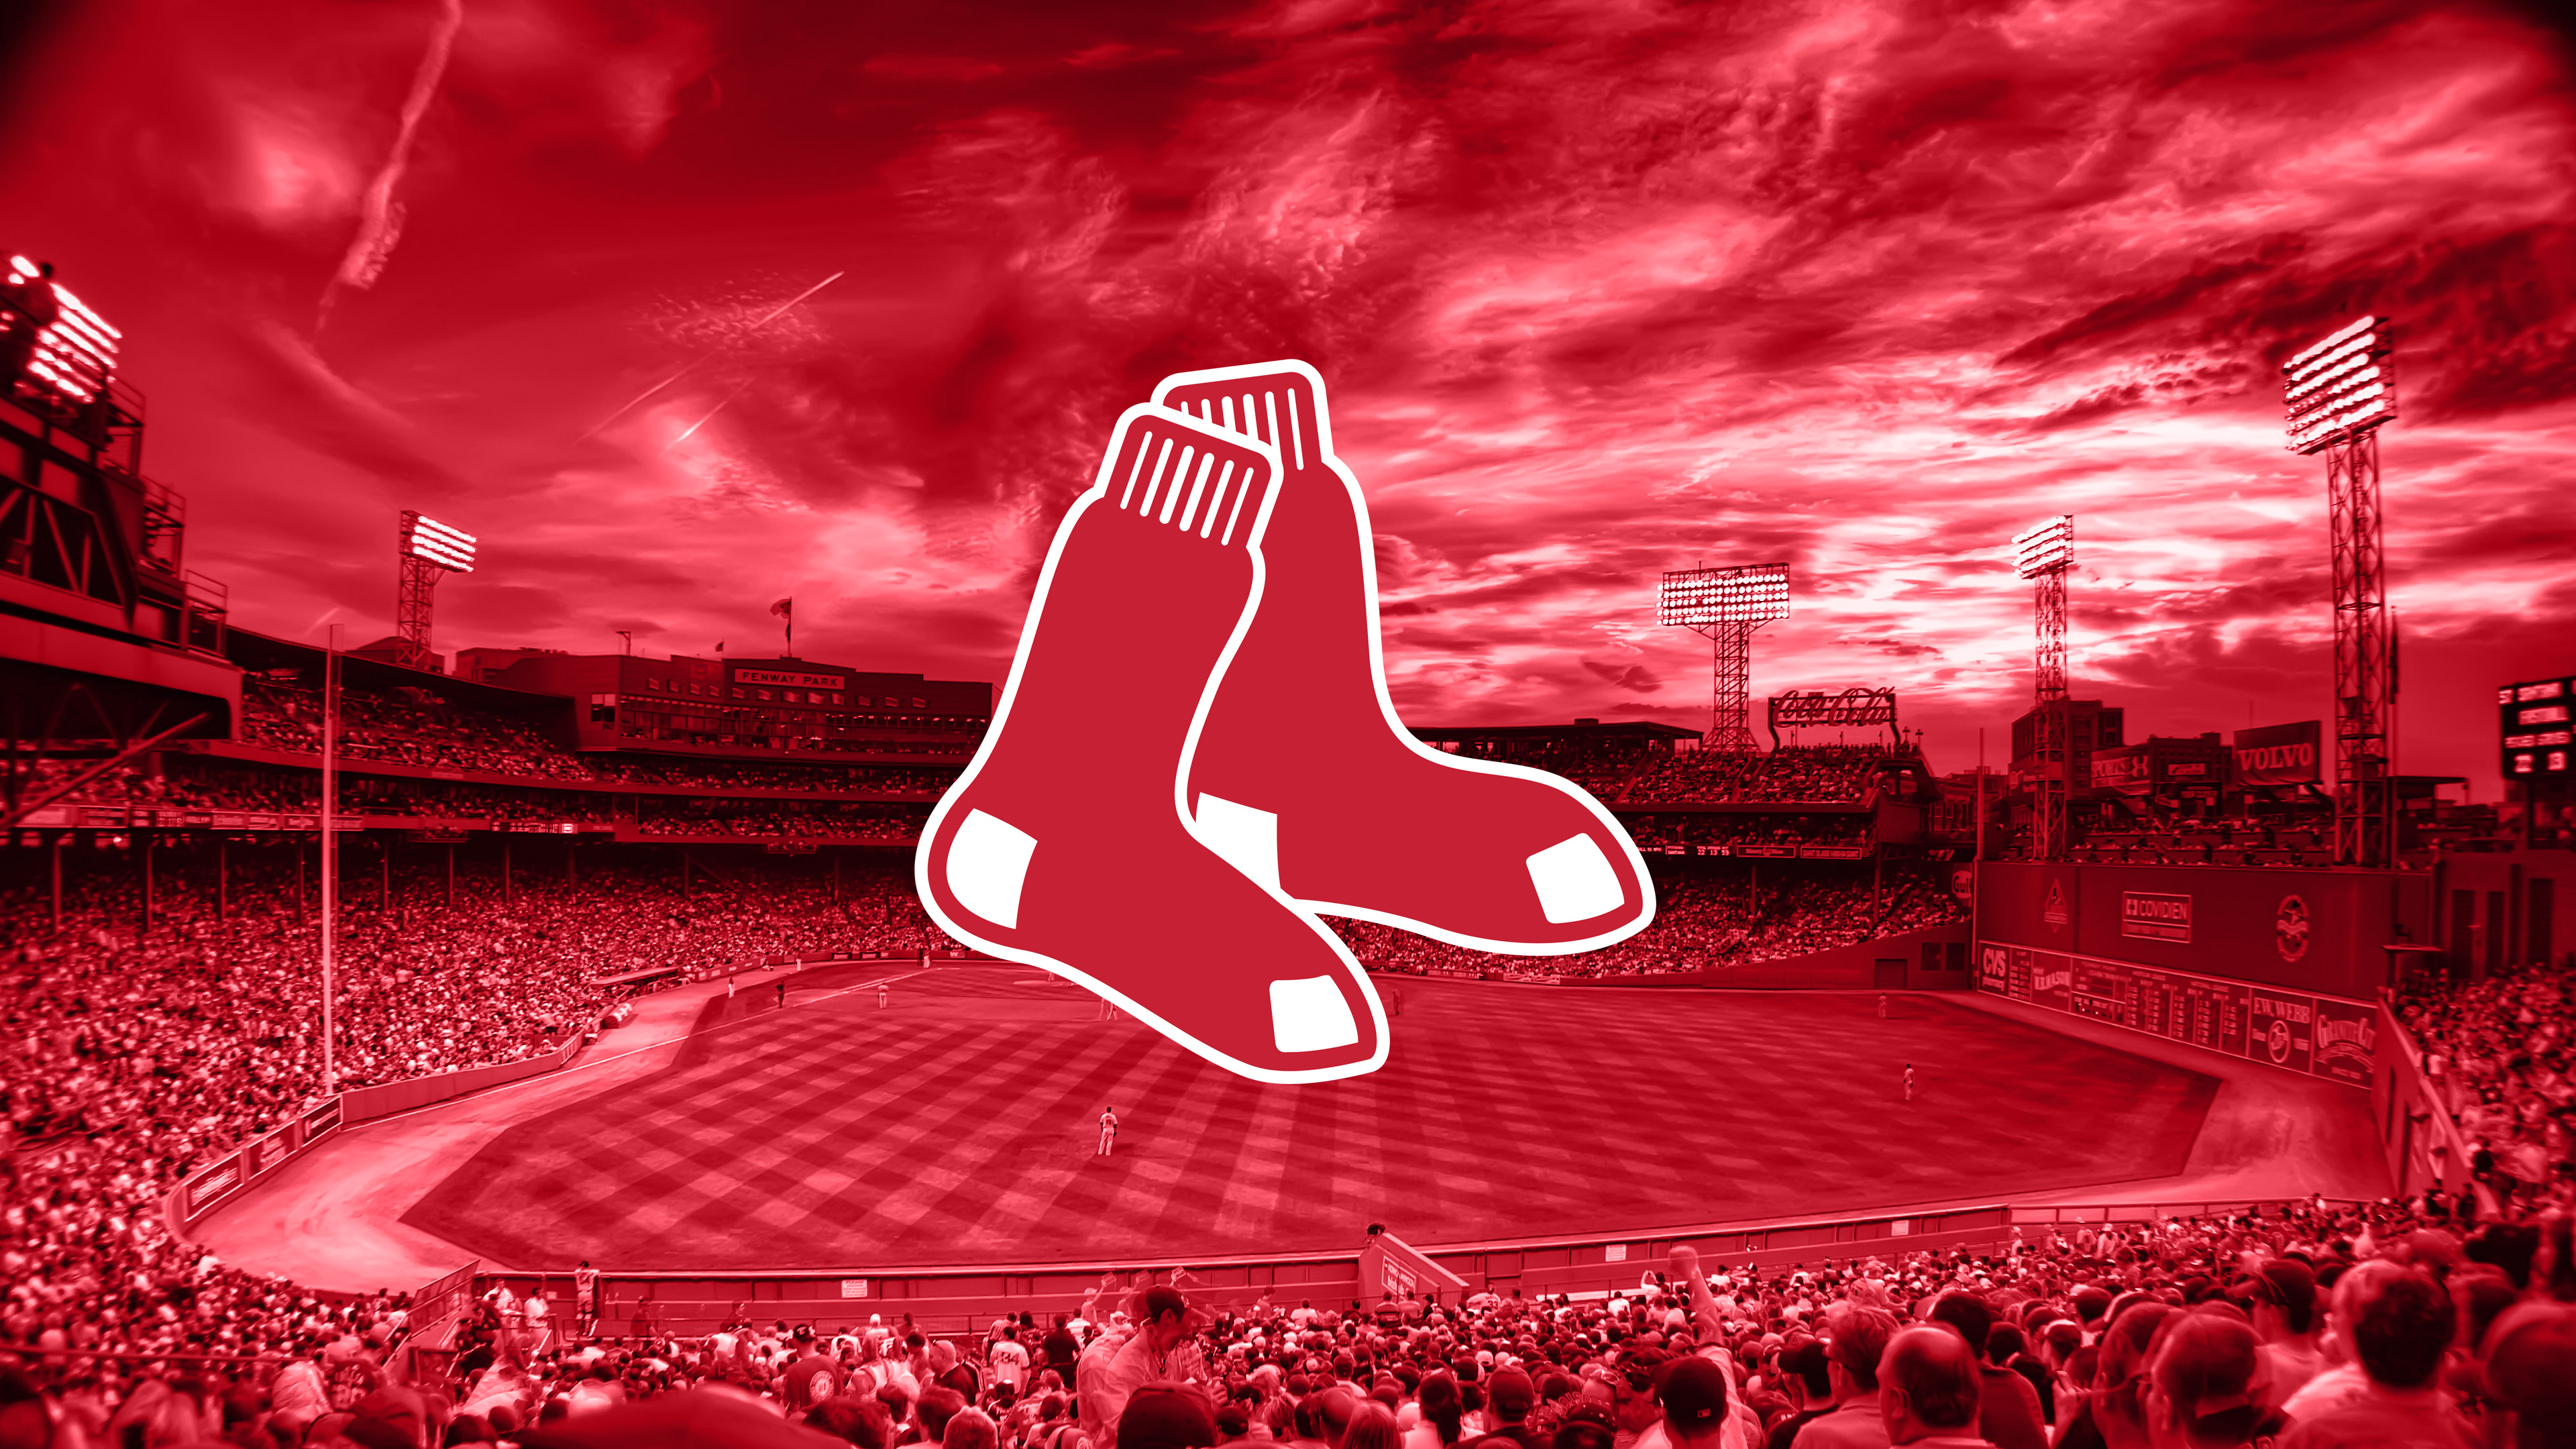 Boston Red Sox Background Image Amp Pictures Becuo